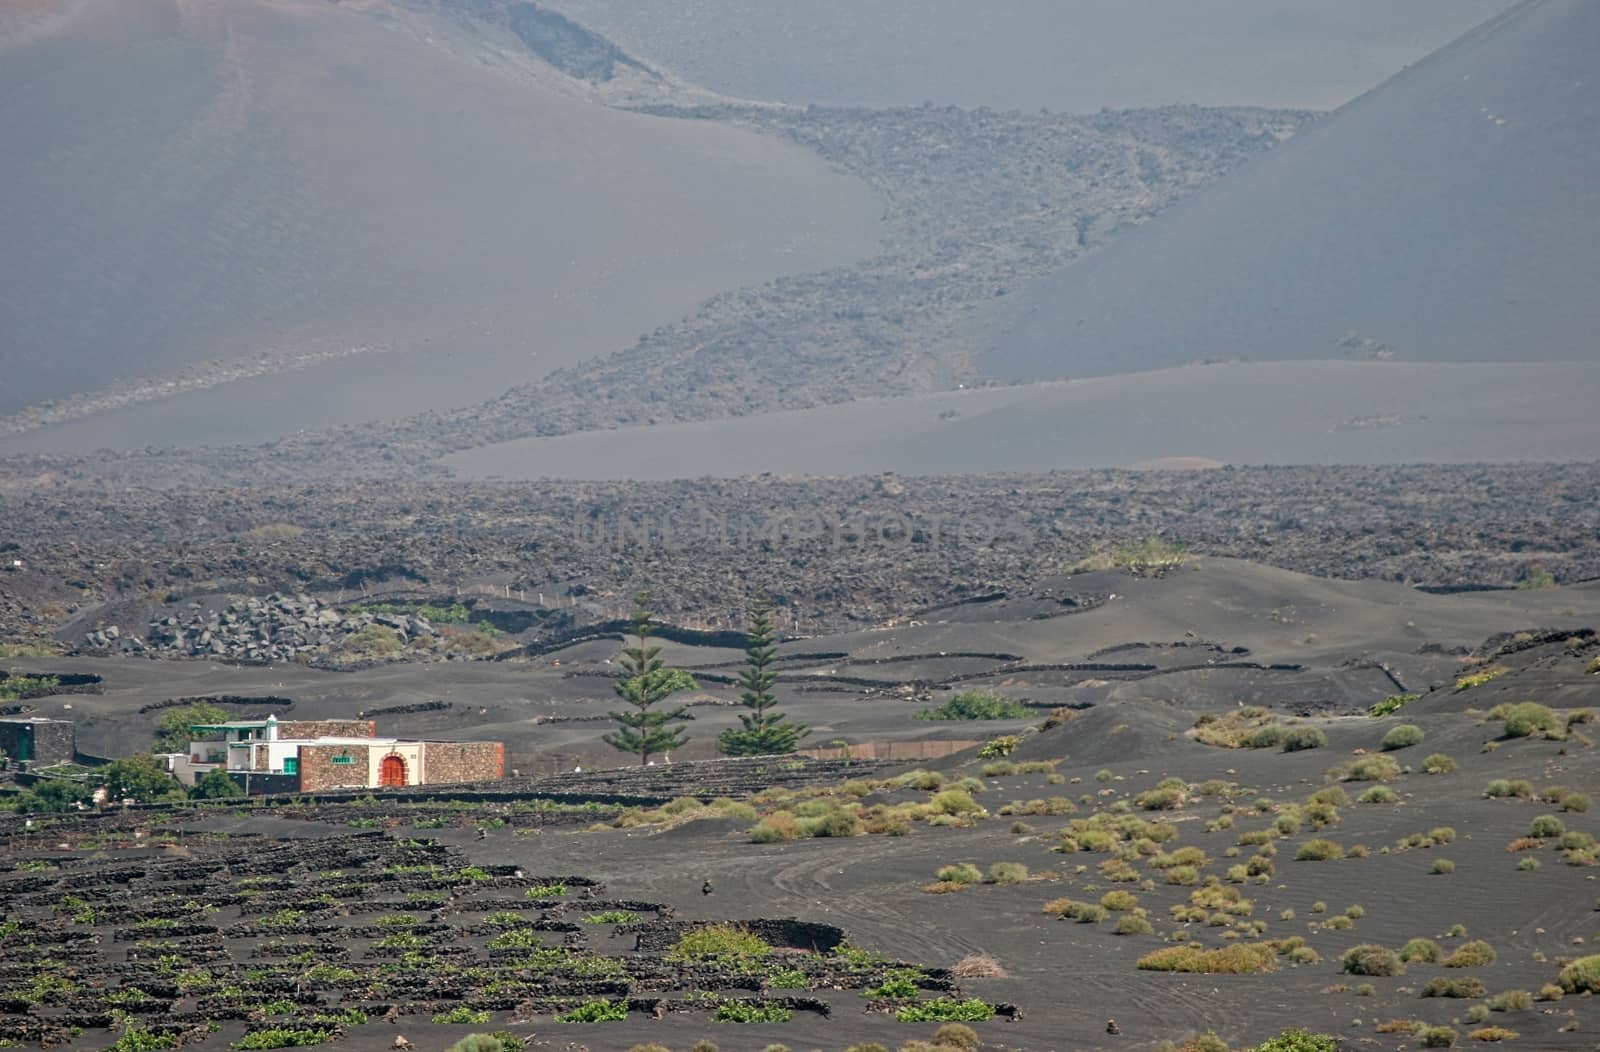 View of a Farm in Lanzarote by phil_bird